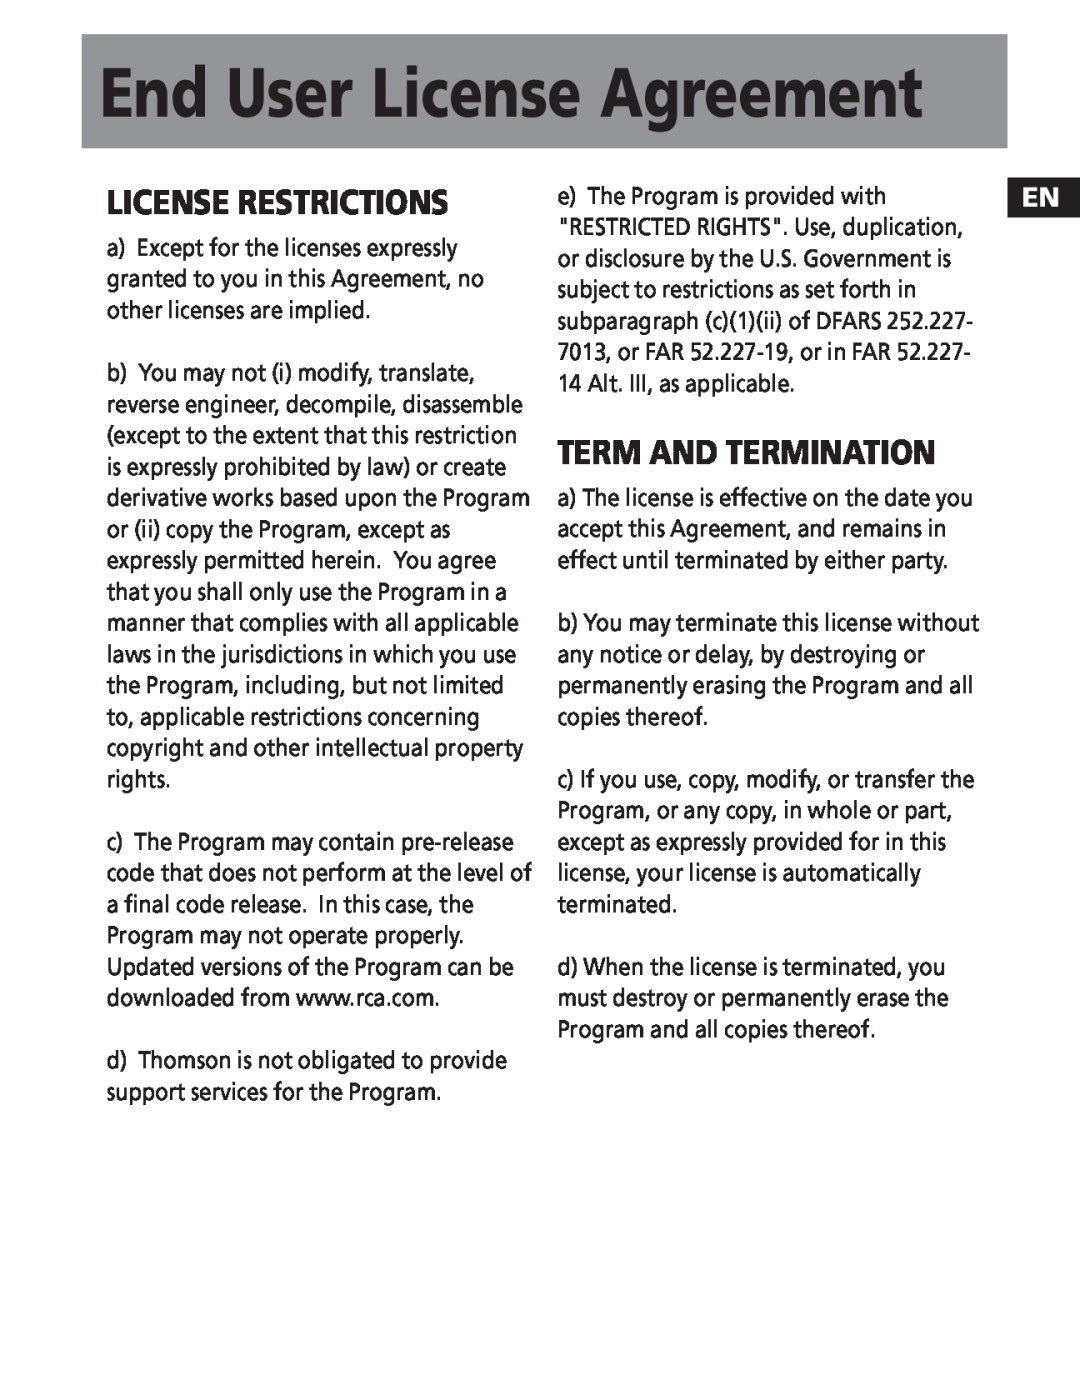 RCA TC1201, TC1202, TC1200 manual License Restrictions, Term And Termination, End User License Agreement 